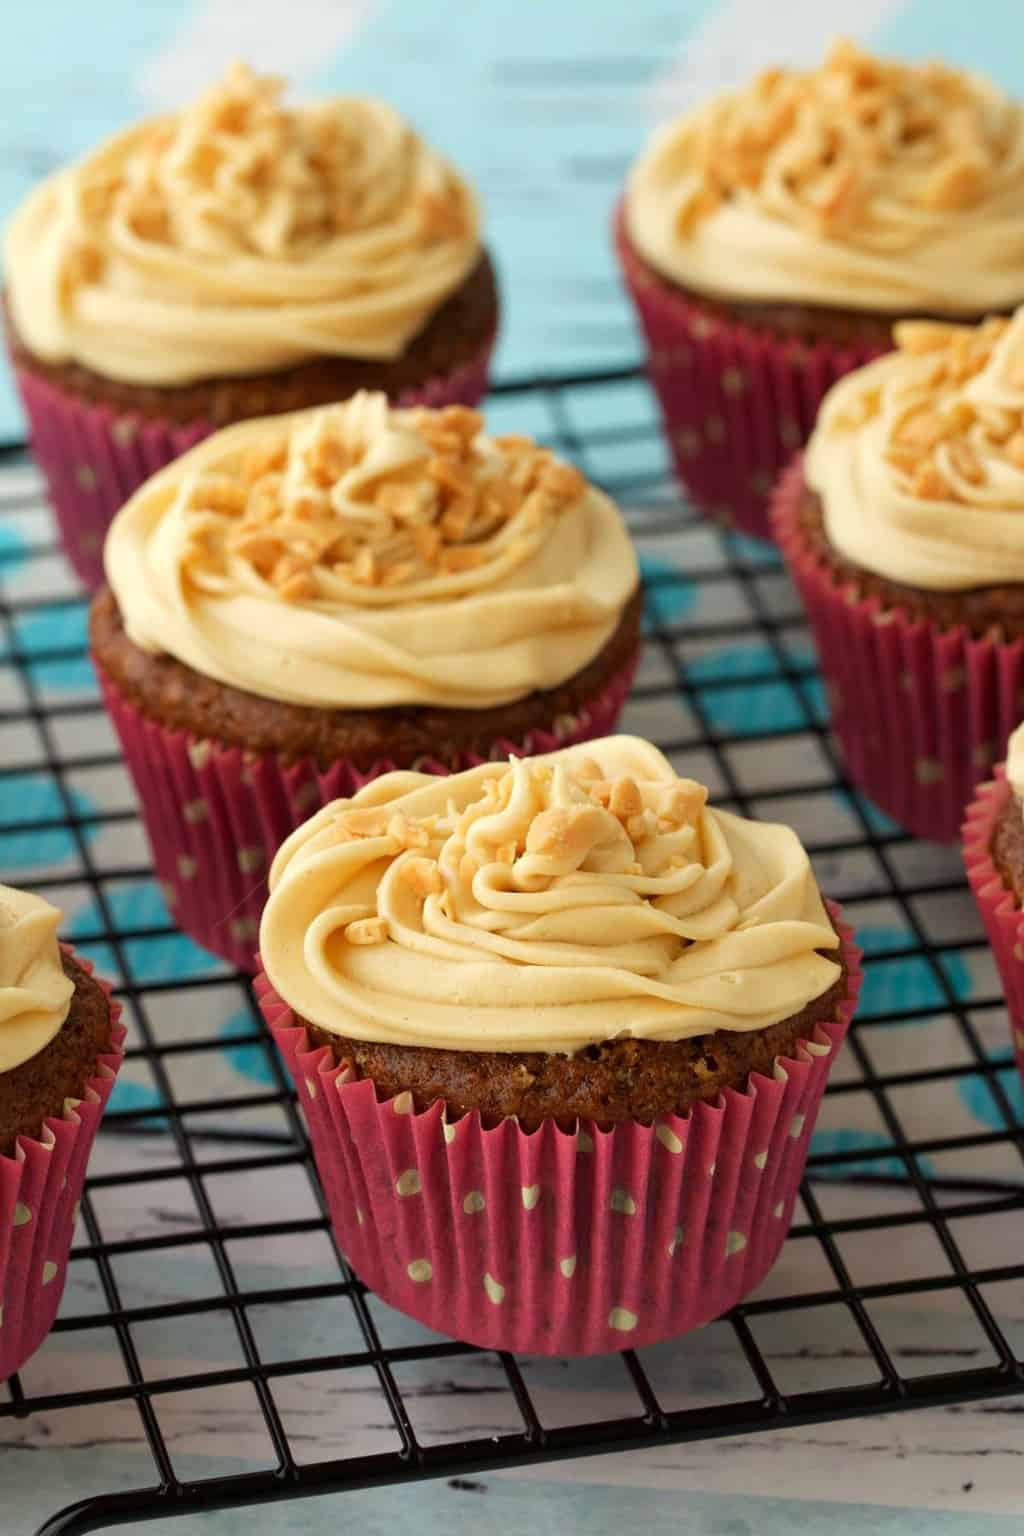 Vegan Banana Cupcakes With Peanut Butter Frosting